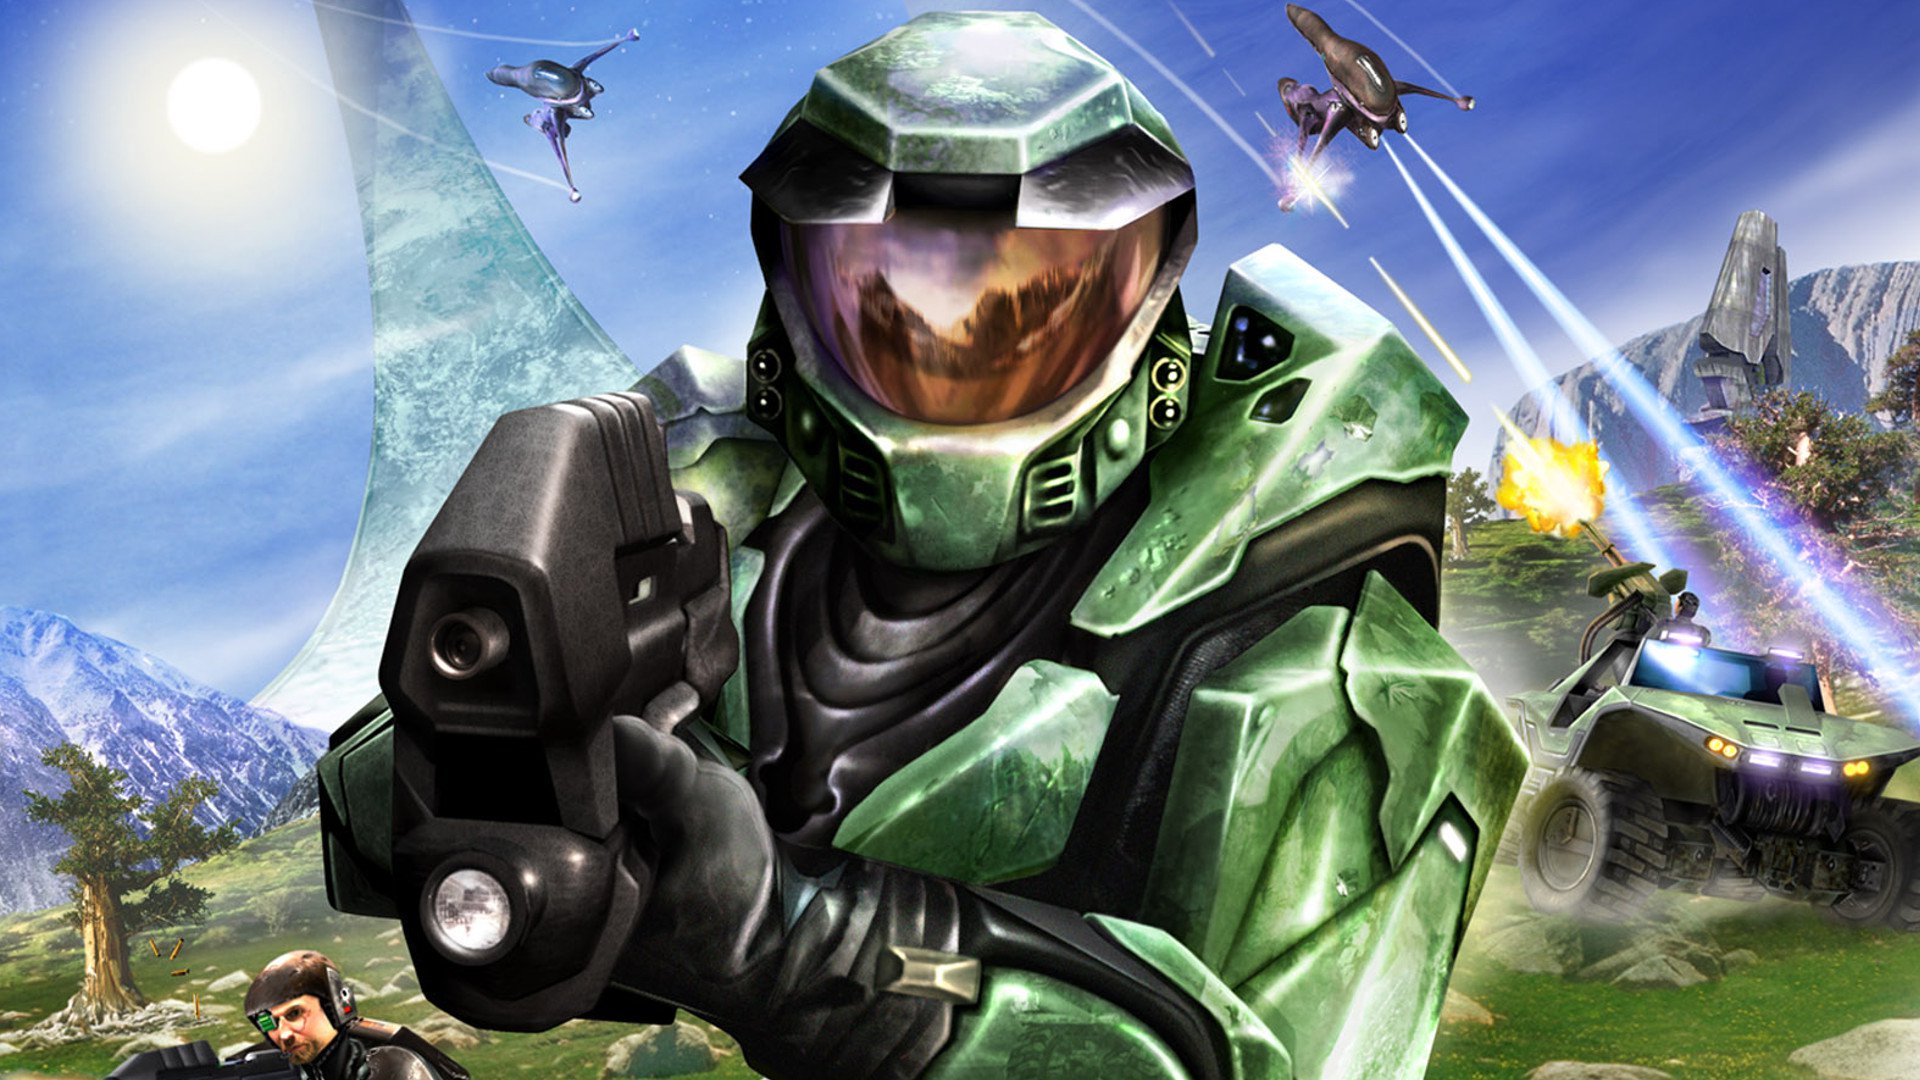 Halo: Combat Evolved didn’t have a campaign for a long time